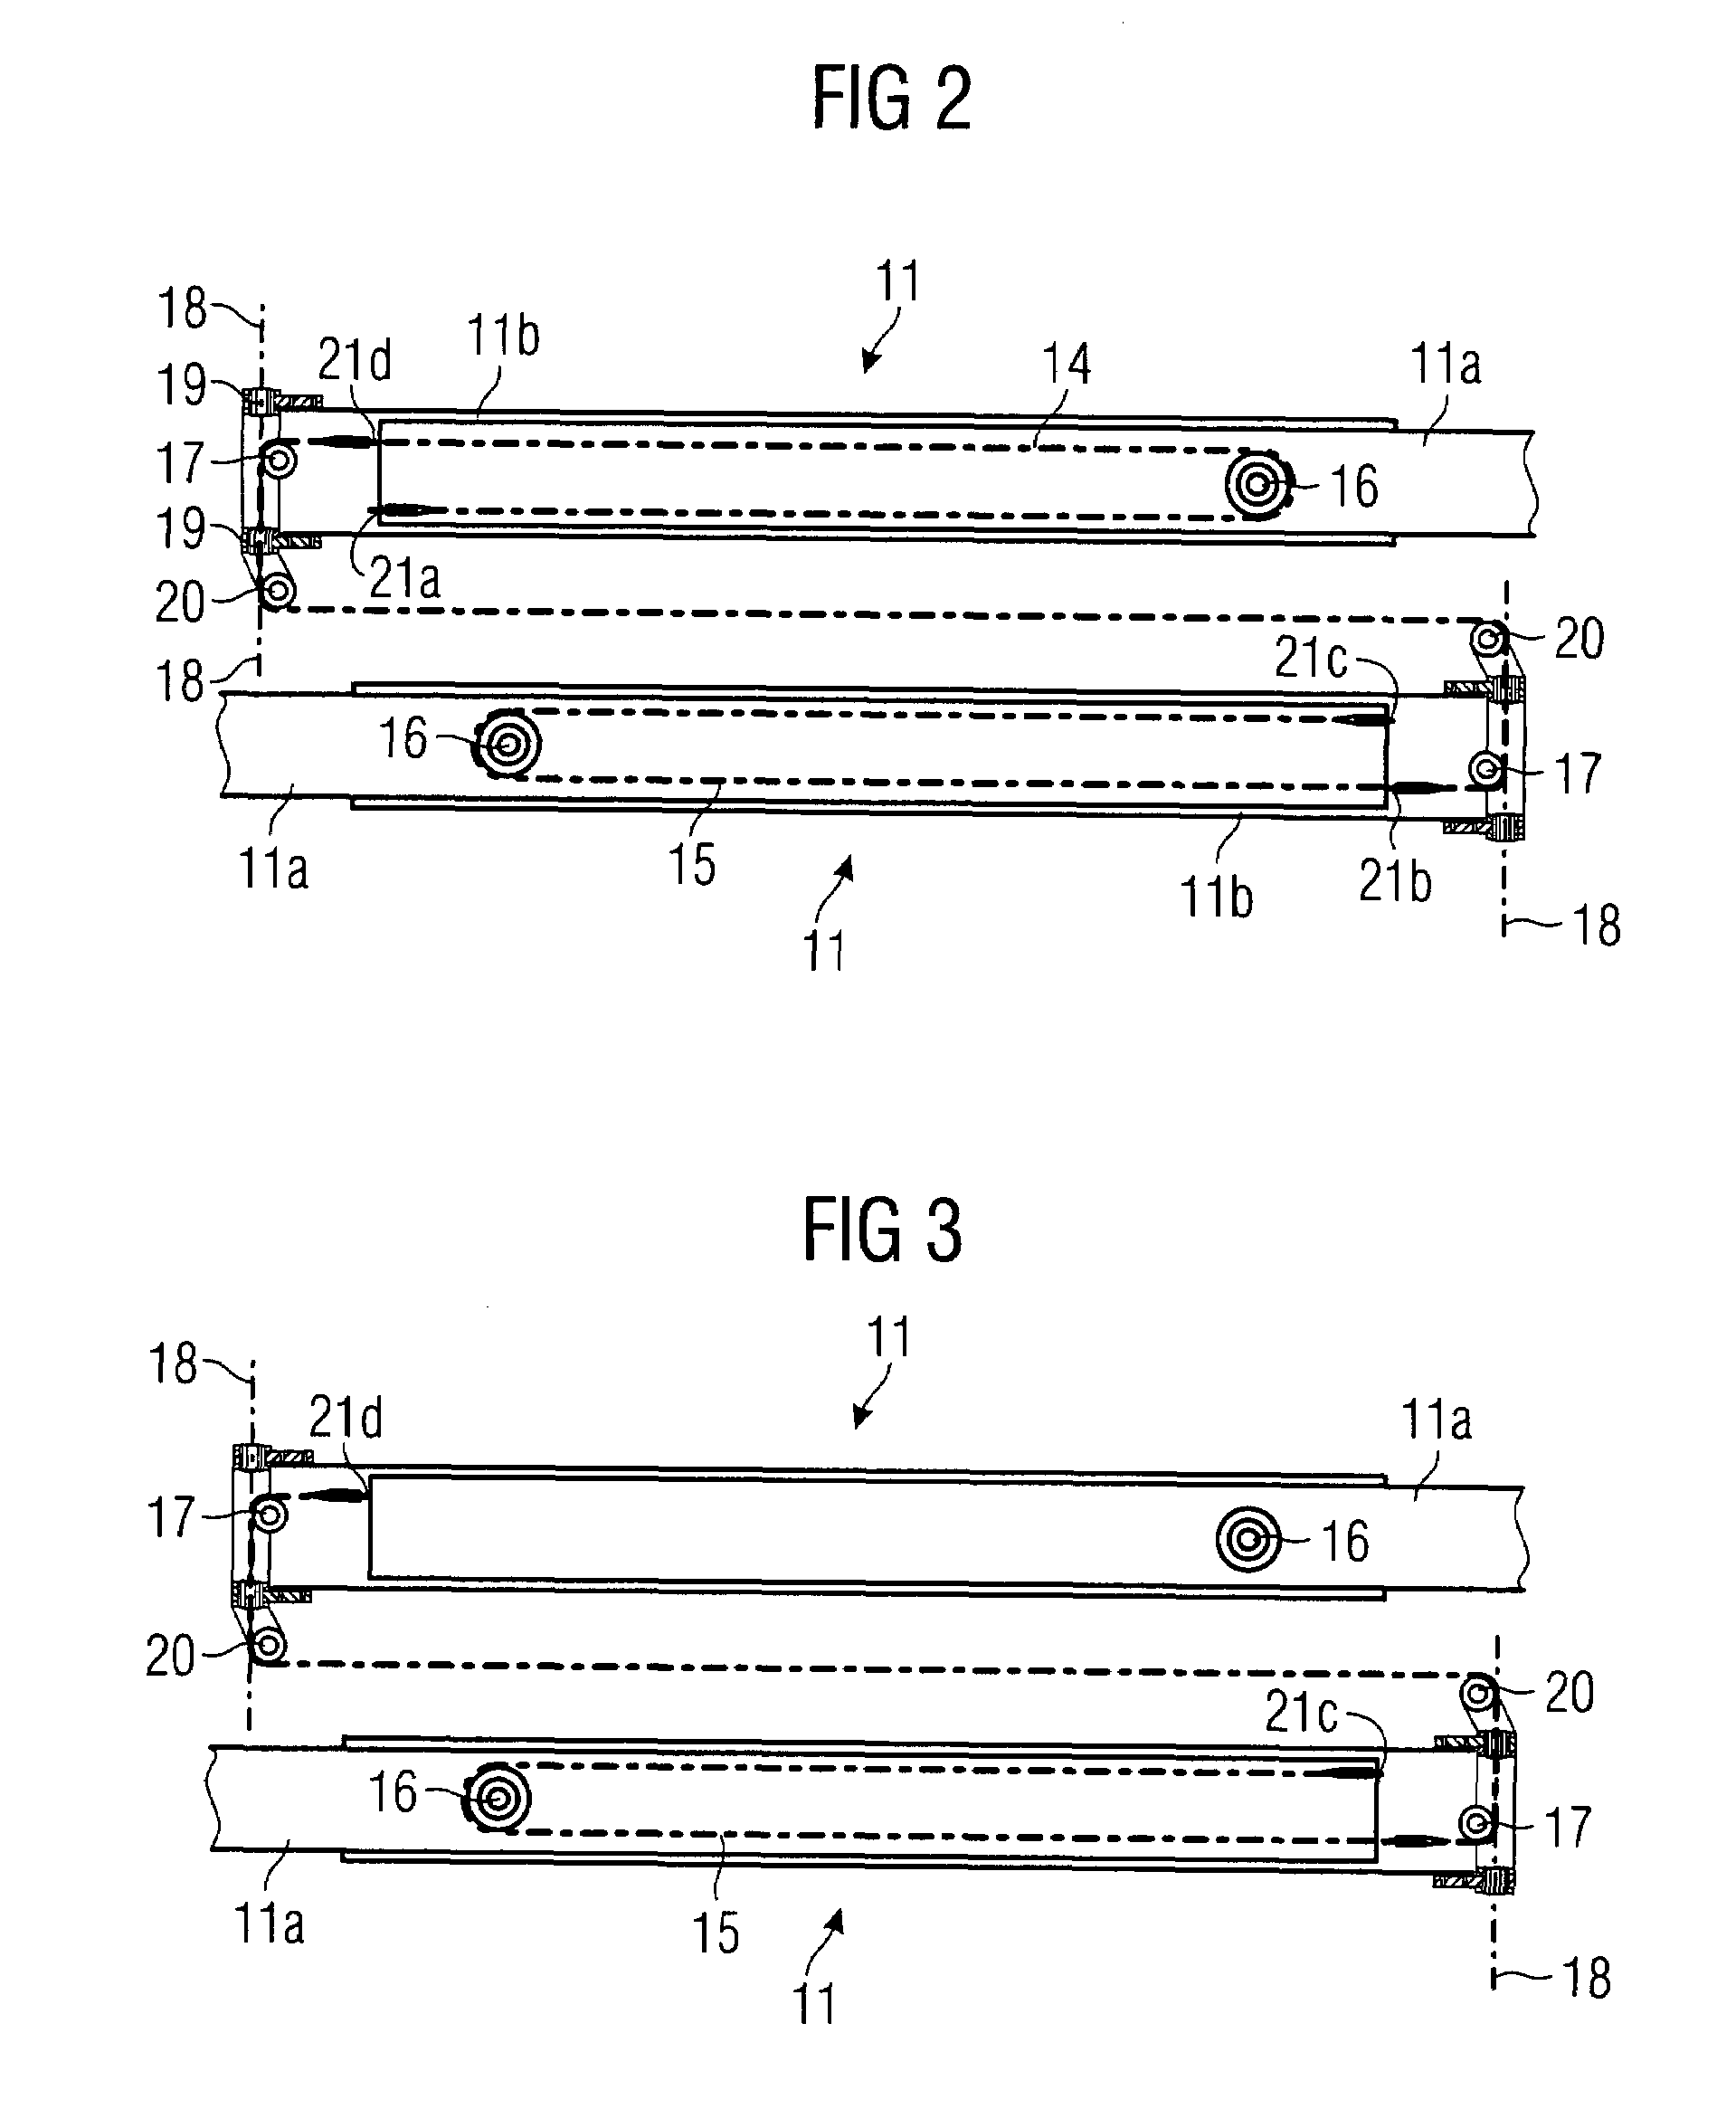 Device for lifting and stabilizing loads